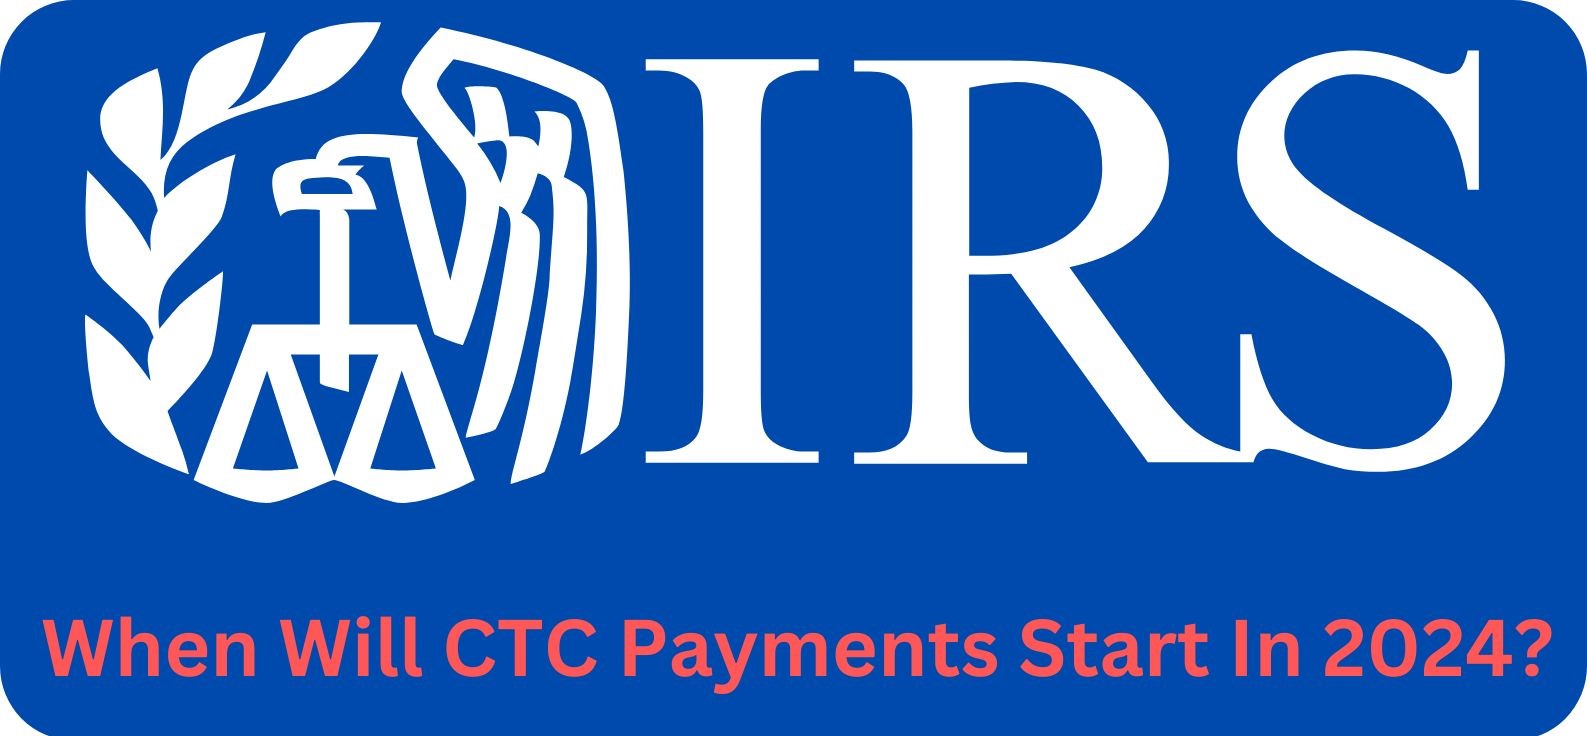 When Will CTC Payments Start In 2024?